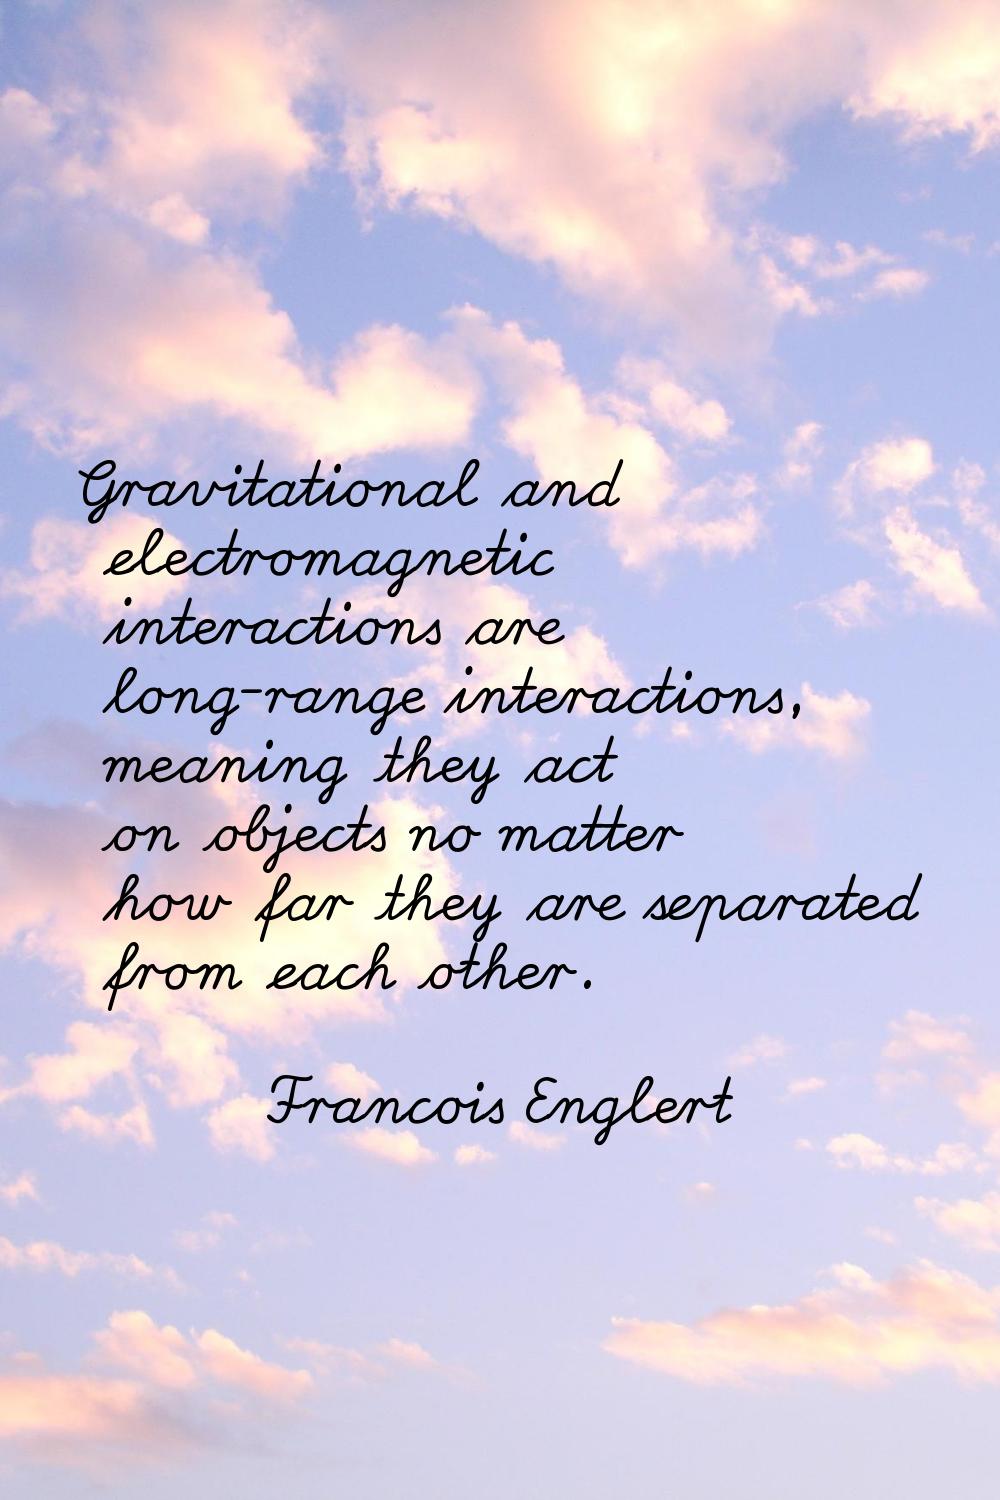 Gravitational and electromagnetic interactions are long-range interactions, meaning they act on obj